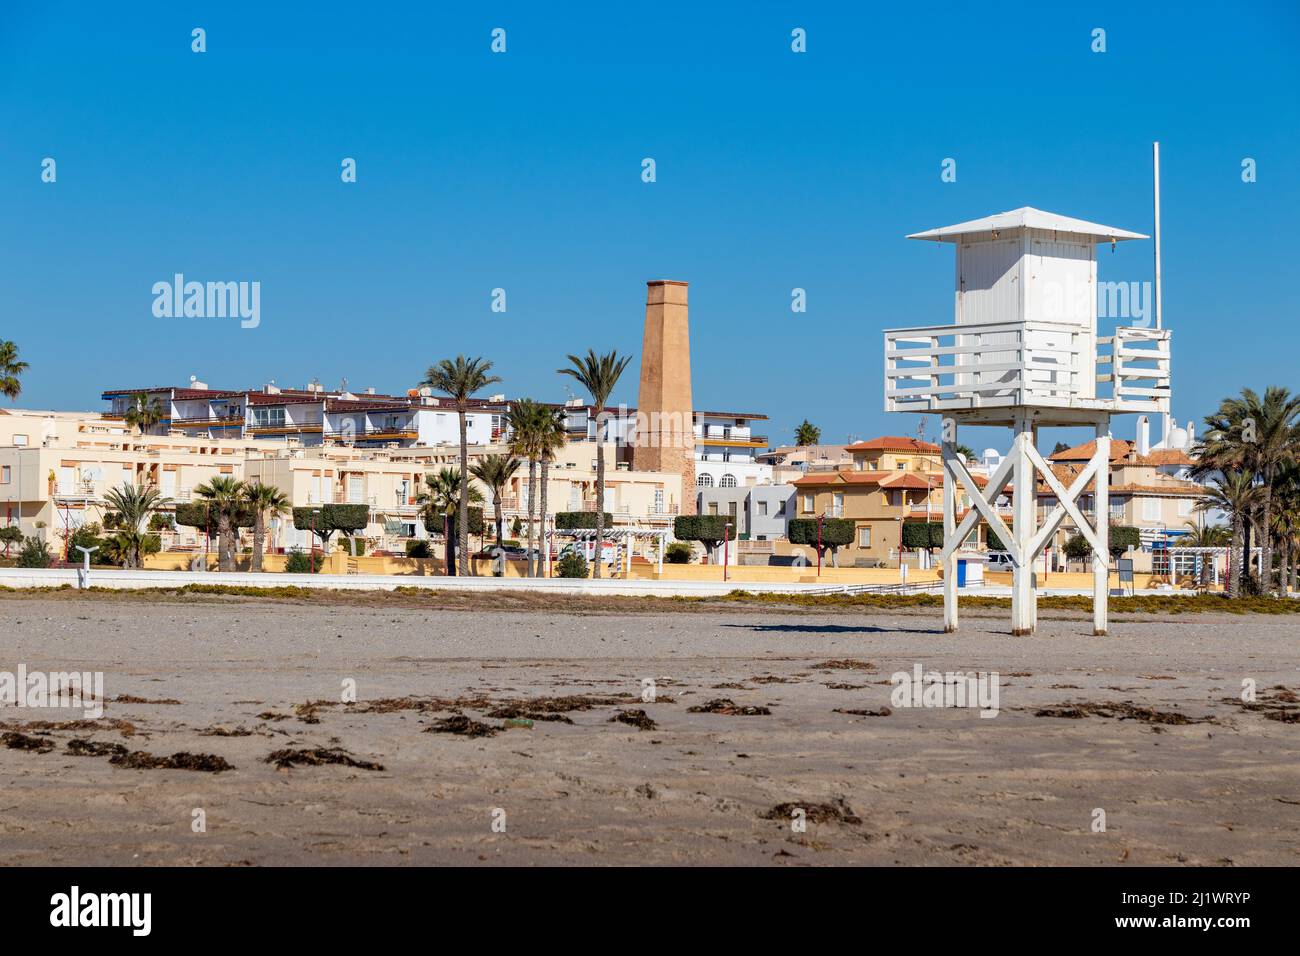 Lifeguards Observation Post on the Beach at Garrucha, Almeria province, Andalucía, Spain Stock Photo